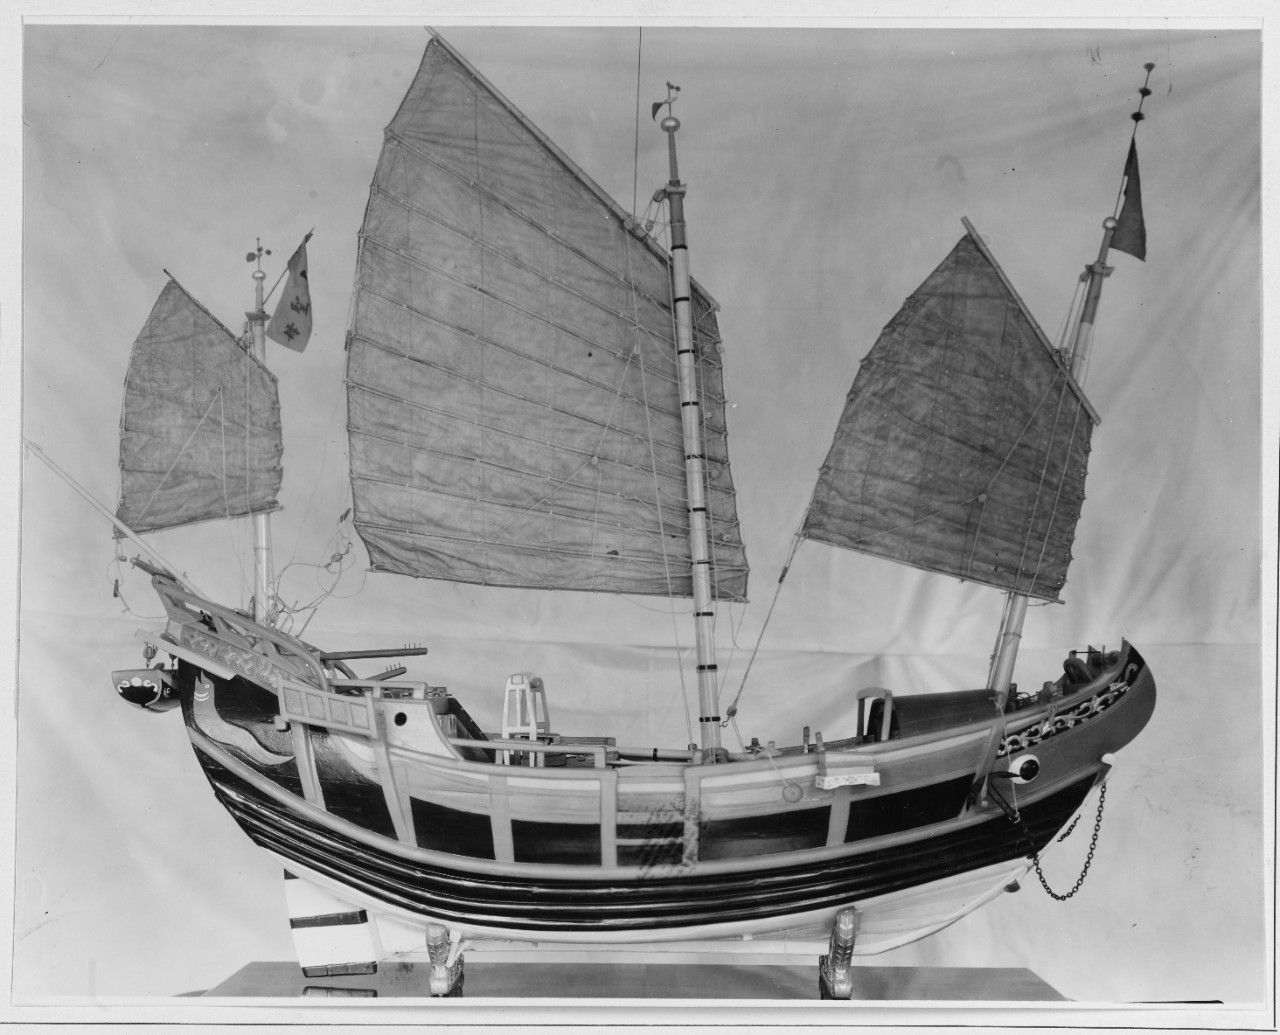 Model of Chinese Junk, of the Fukien Province Type. 